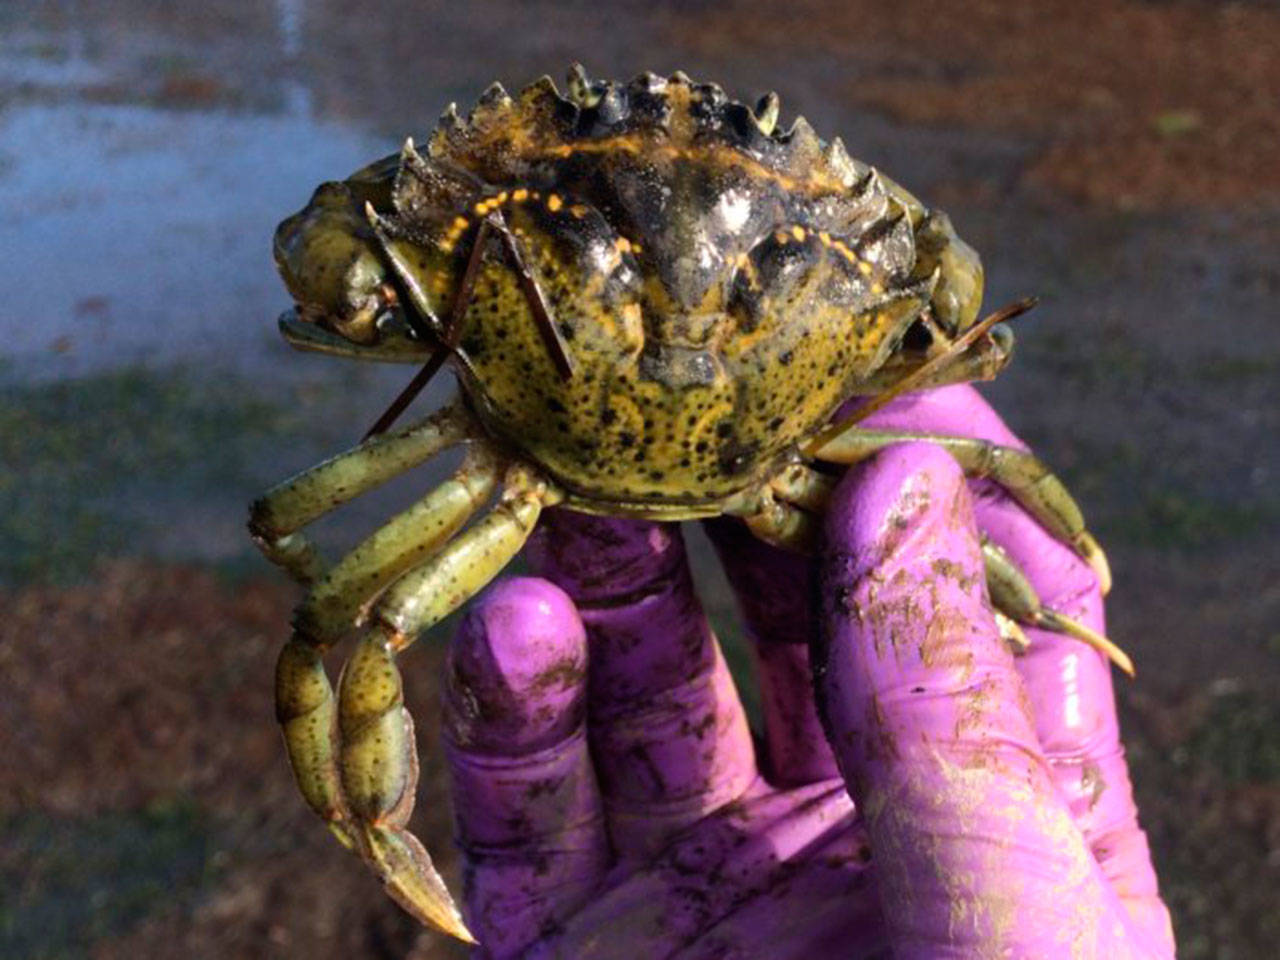 The European green crab can appear native to the waters where they settle (Jeff Adams Photo).